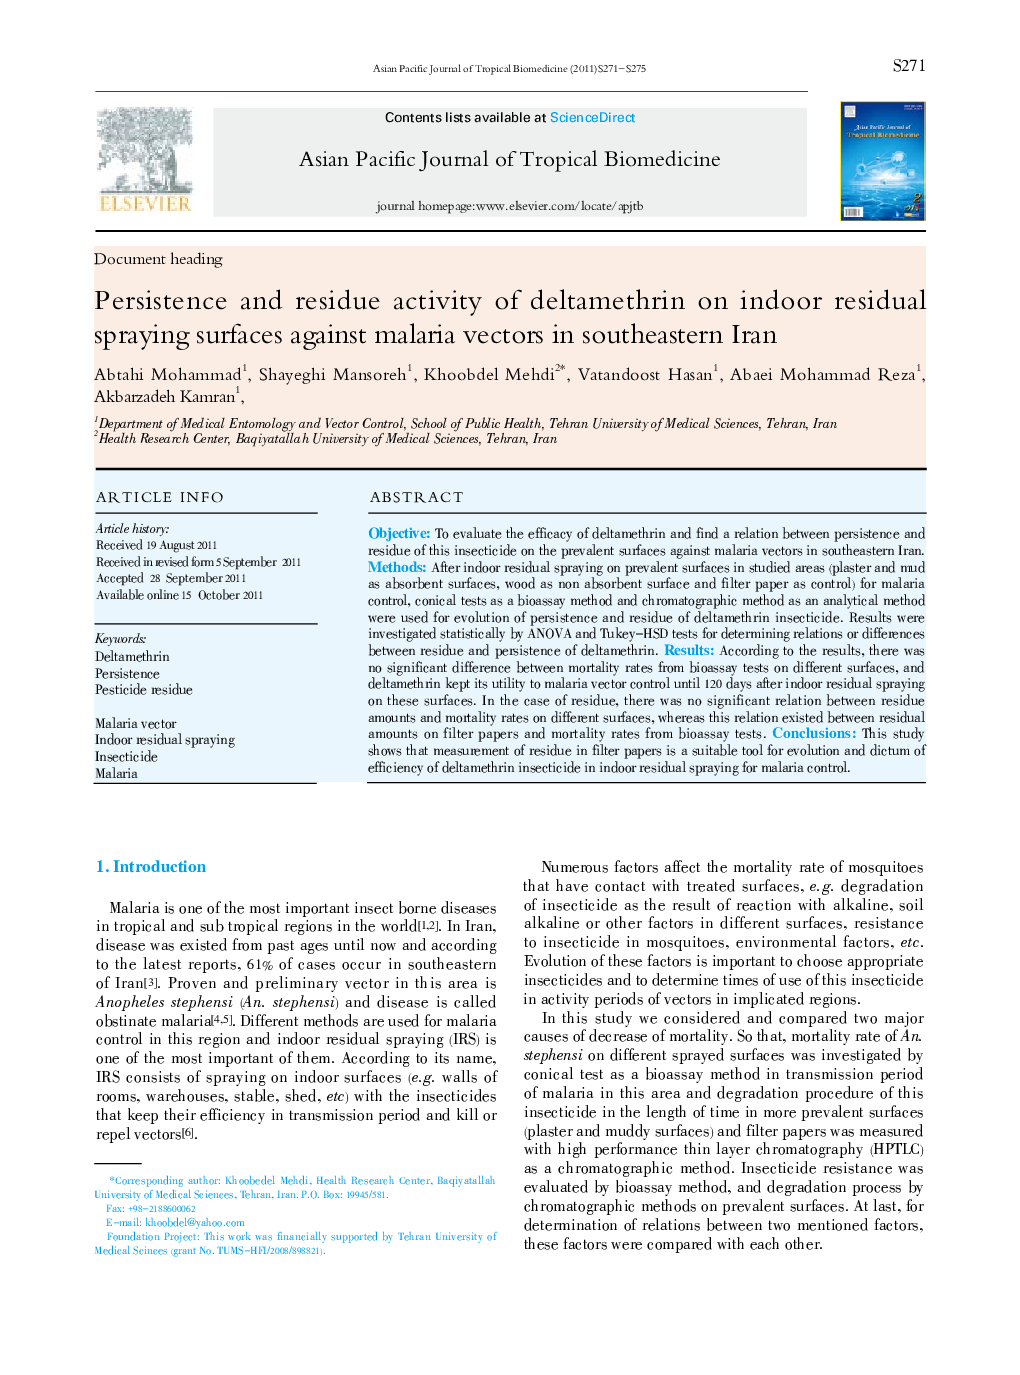 Persistence and residue activity of deltamethrin on indoor residual spraying surfaces against malaria vectors in southeastern Iran